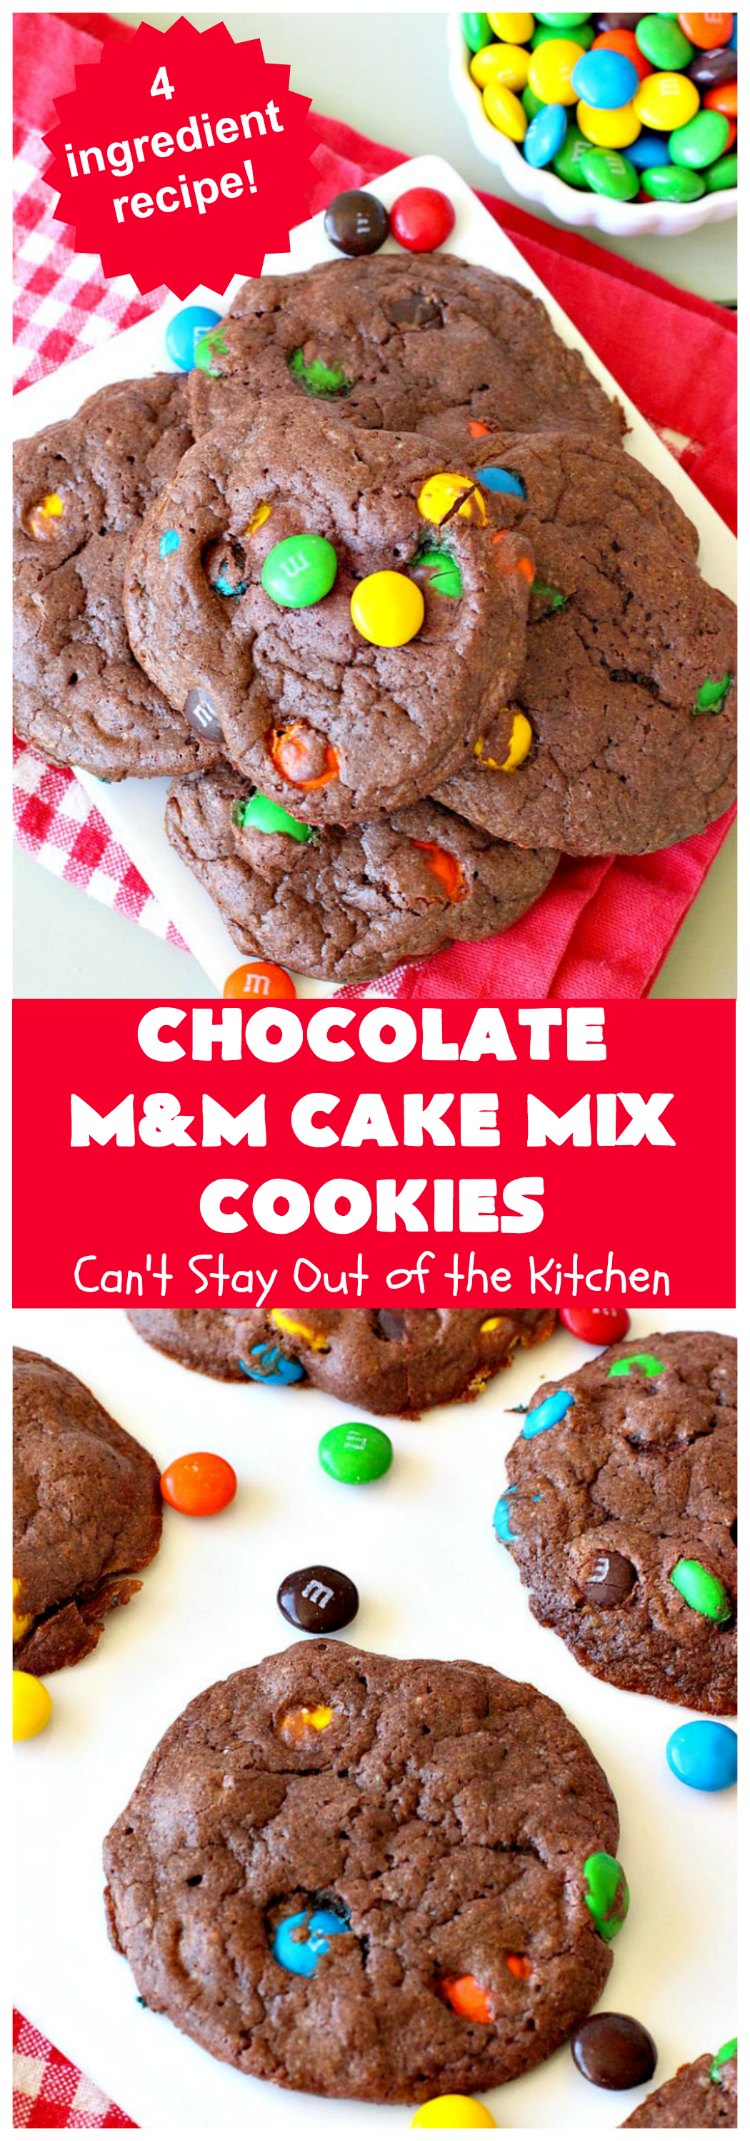 Chocolate M&M Cake Mix Cookies | Can't Stay Out of the Kitchen